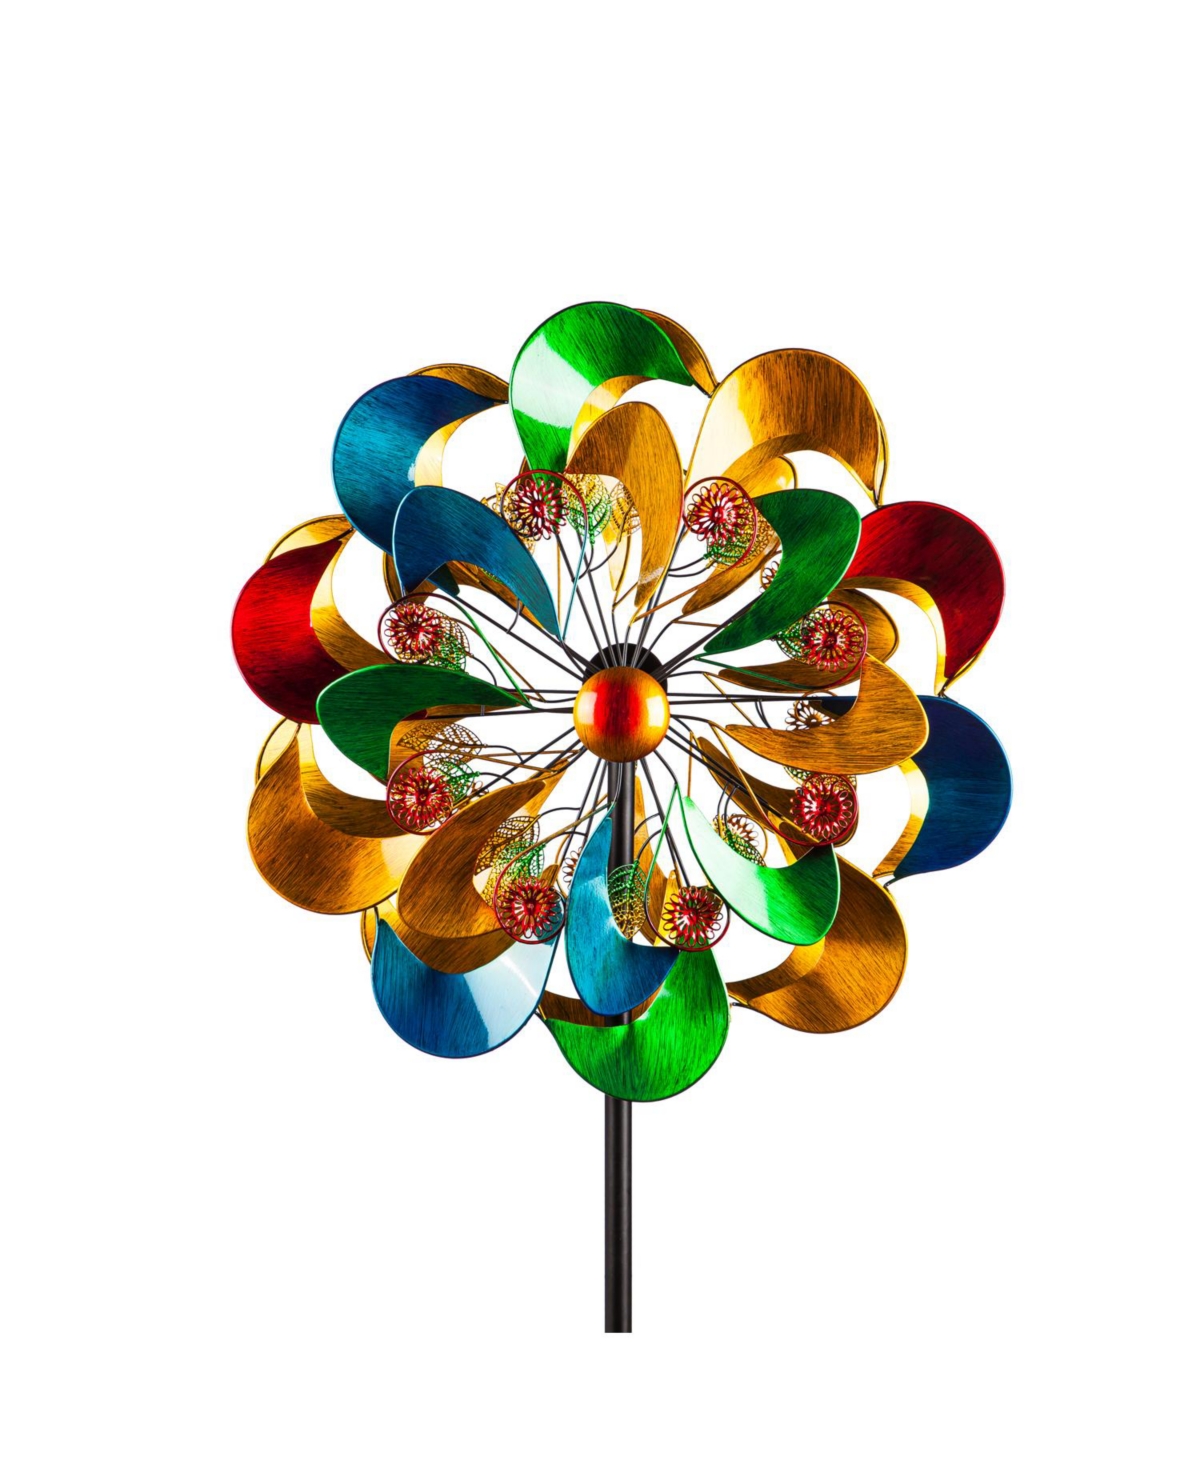 Evergreen 75"h Wind Spinner, Layered Flower- Fade And Weather Resistant Outdoor Decor For Homes, Yards And Gar In Multicolored